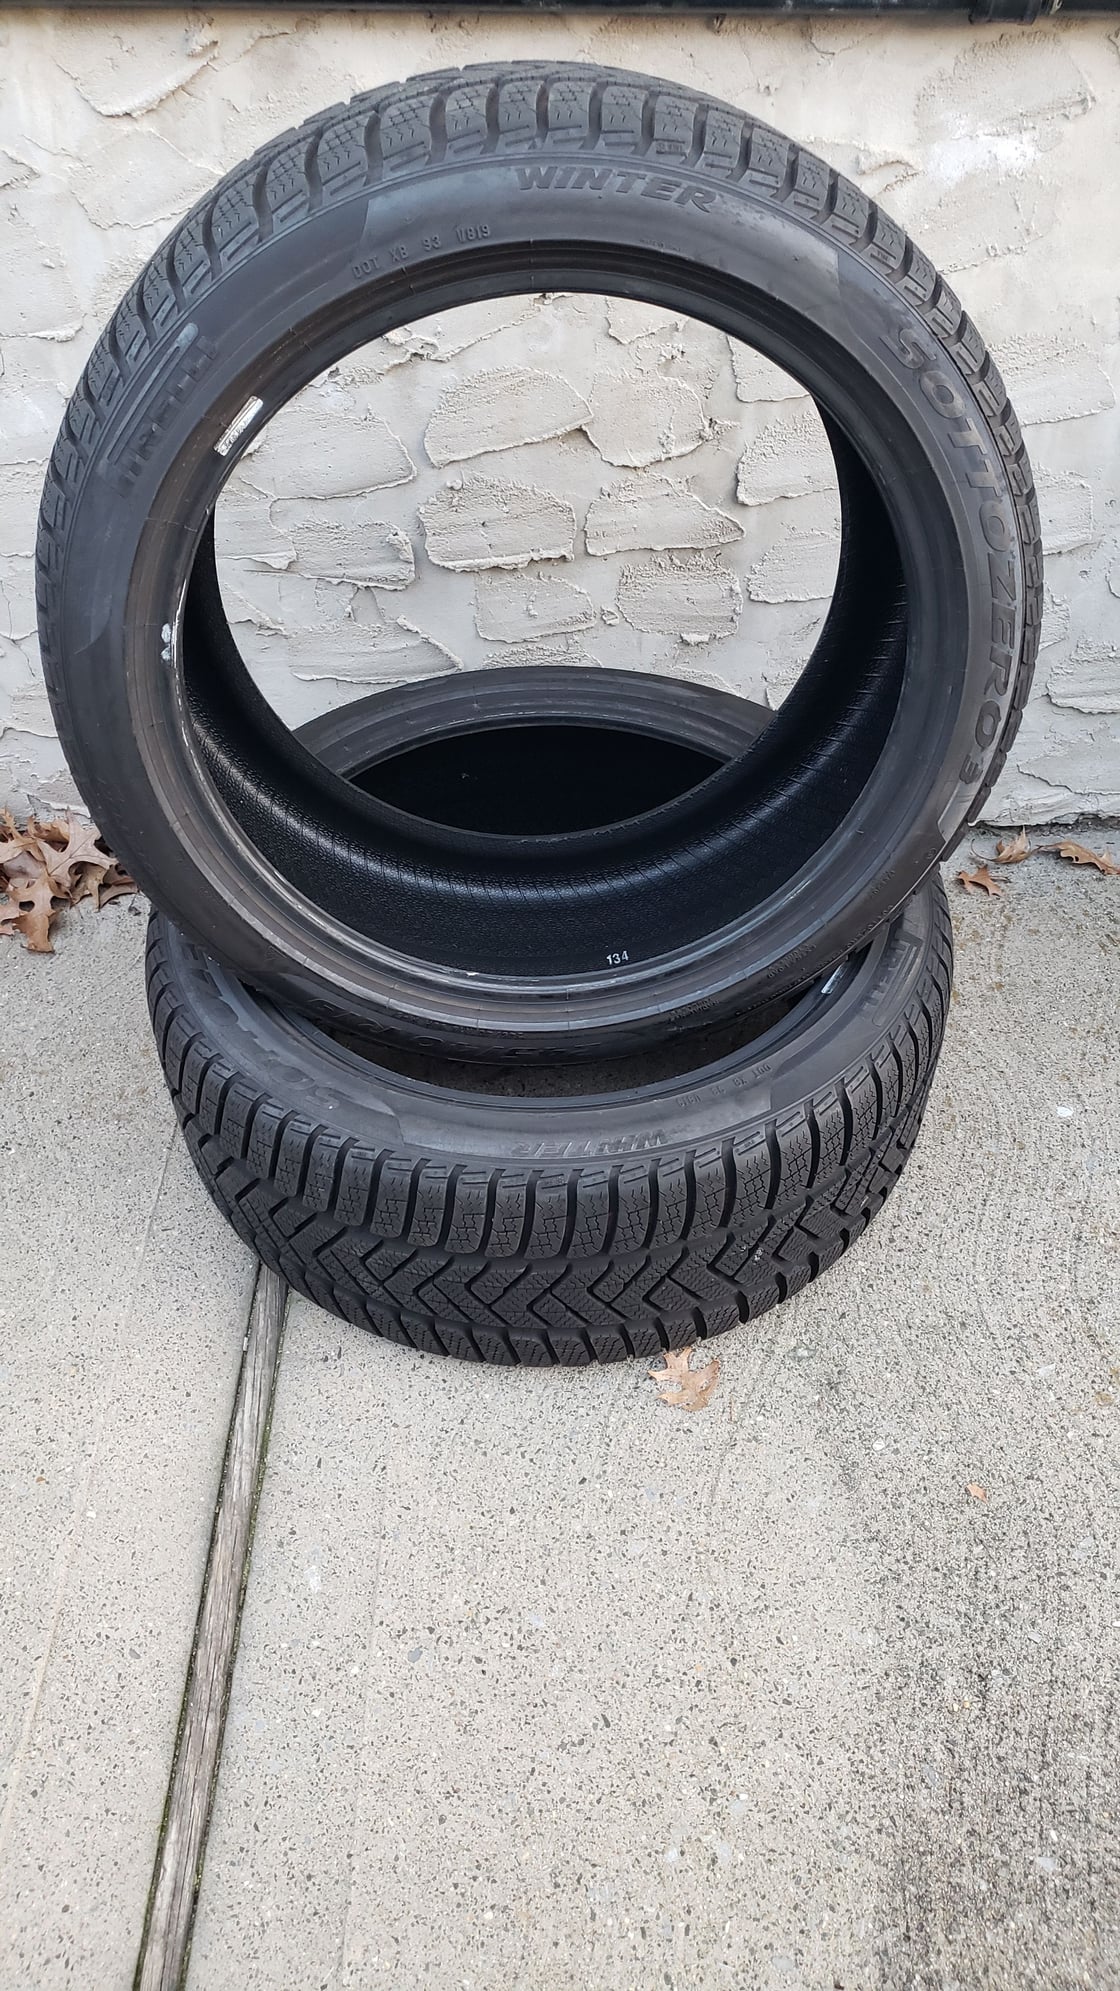 Wheels and Tires/Axles - PIRELLI WINTER SOTTOZERO 3 - SIZE: 245/40R19 - Used - All Years Mercedes-Benz All Models - Staten Island, NY 10312, United States